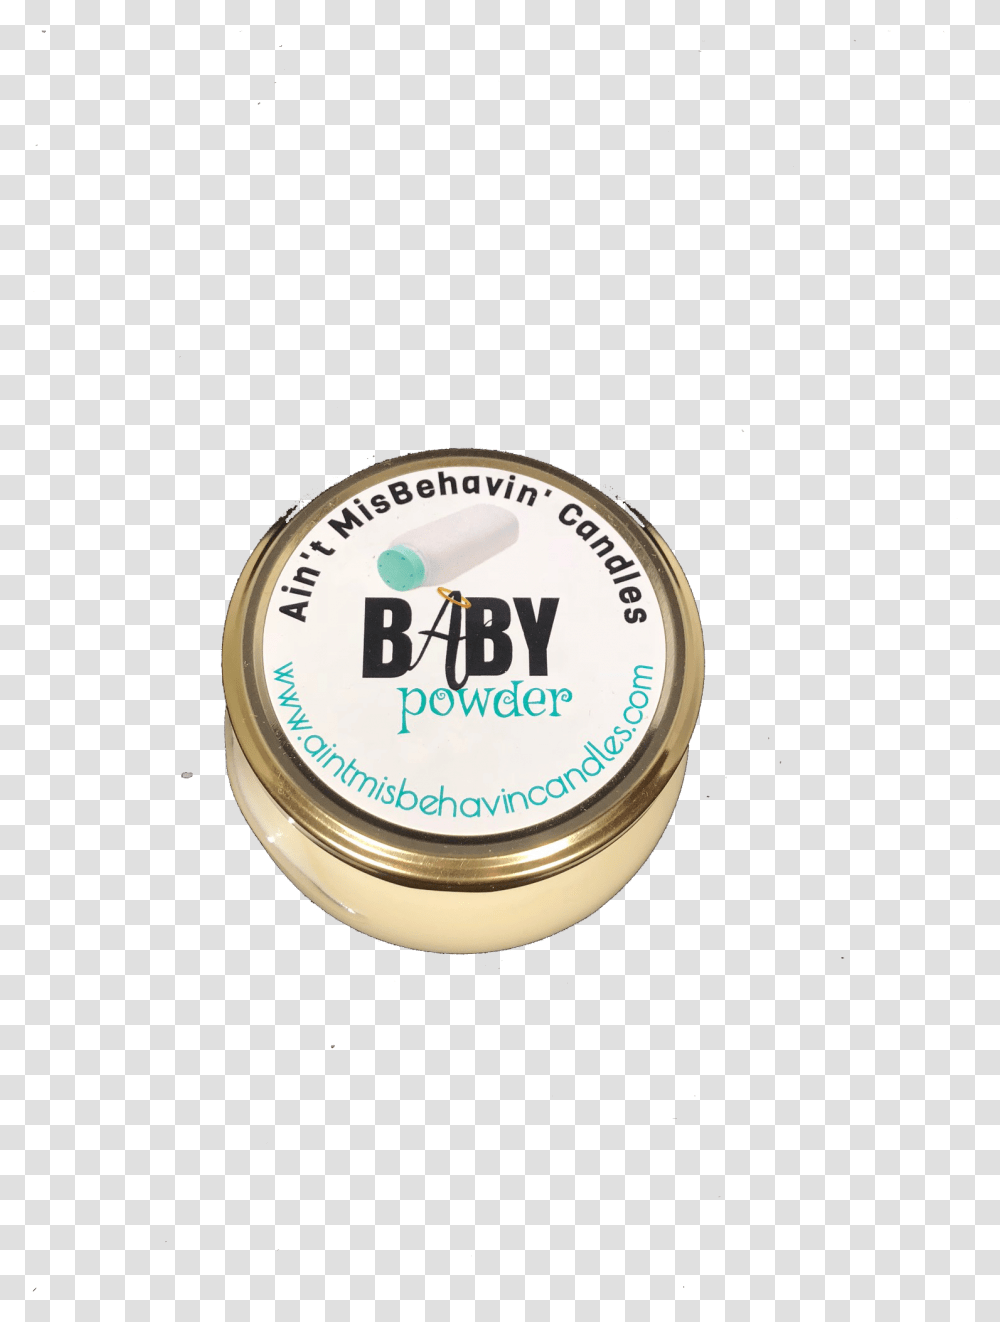 Image Of Baby Powder Candle, Bottle, Clock Tower, Cosmetics, Wristwatch Transparent Png